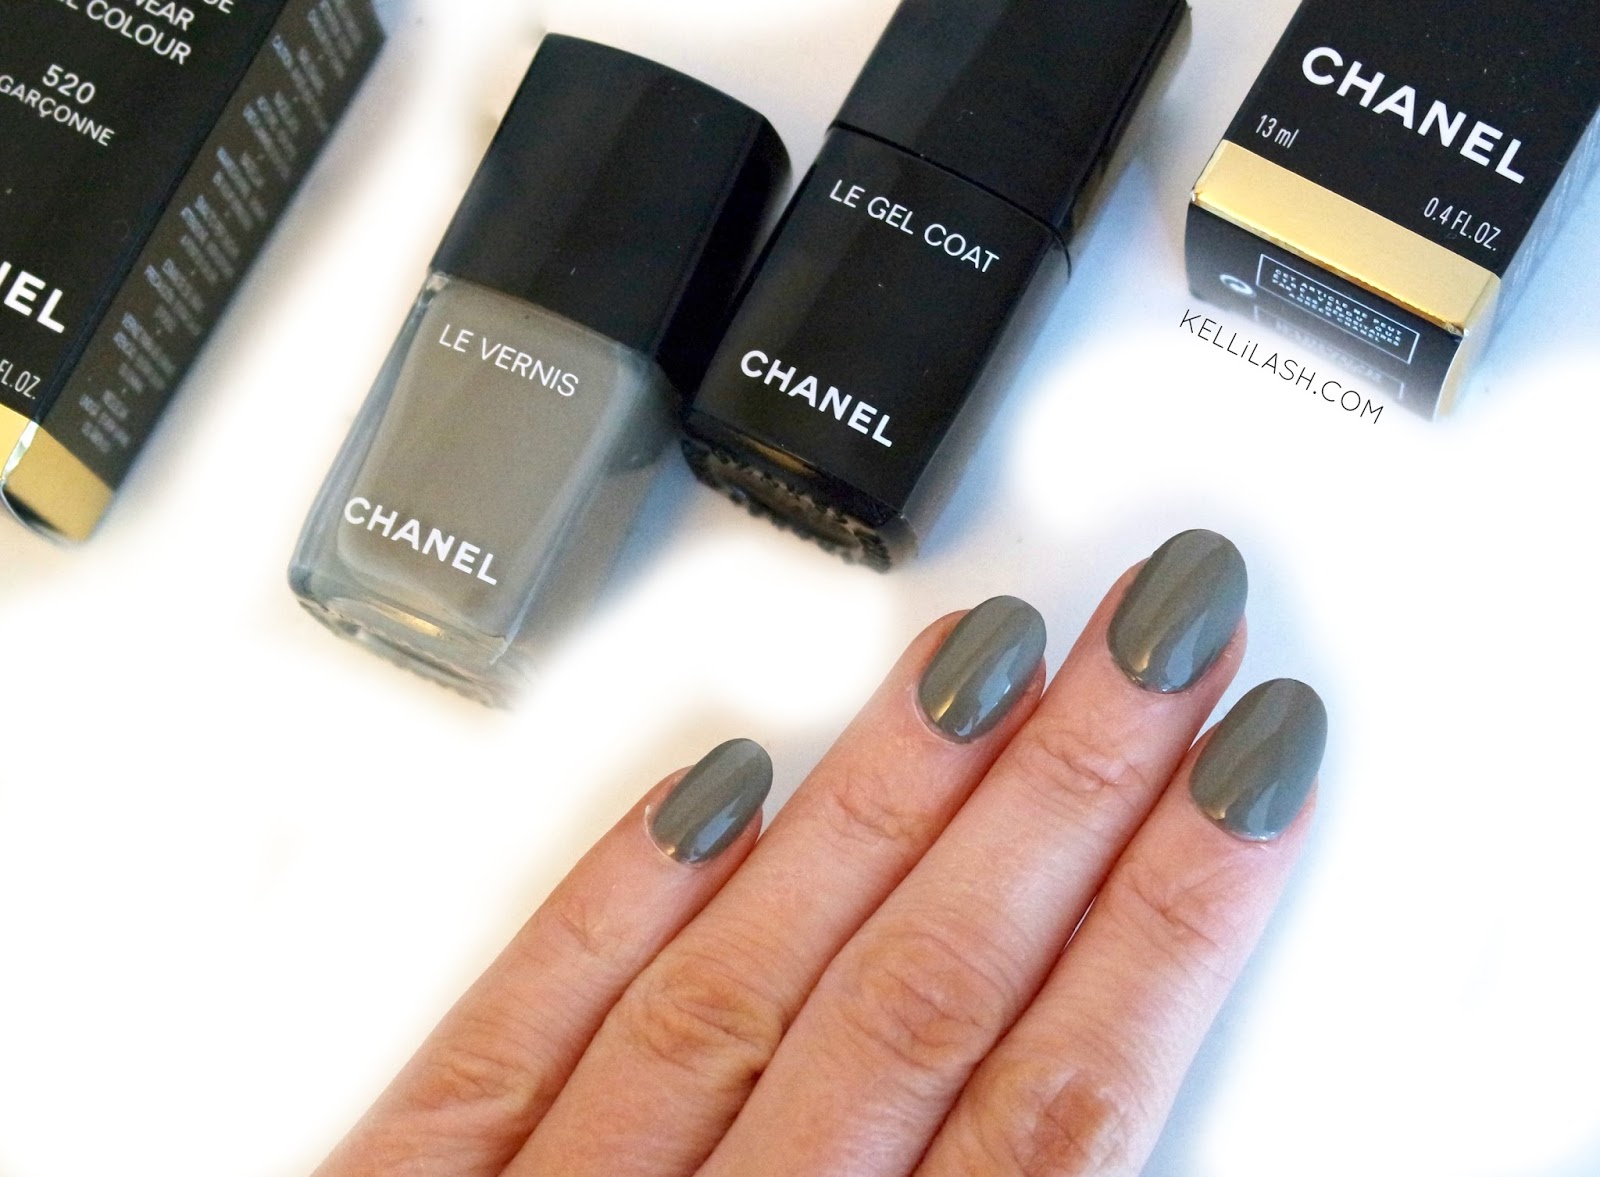 Chanel Le Vernis Longwear Nail Colour in "New Horizon" (2024) - wide 7